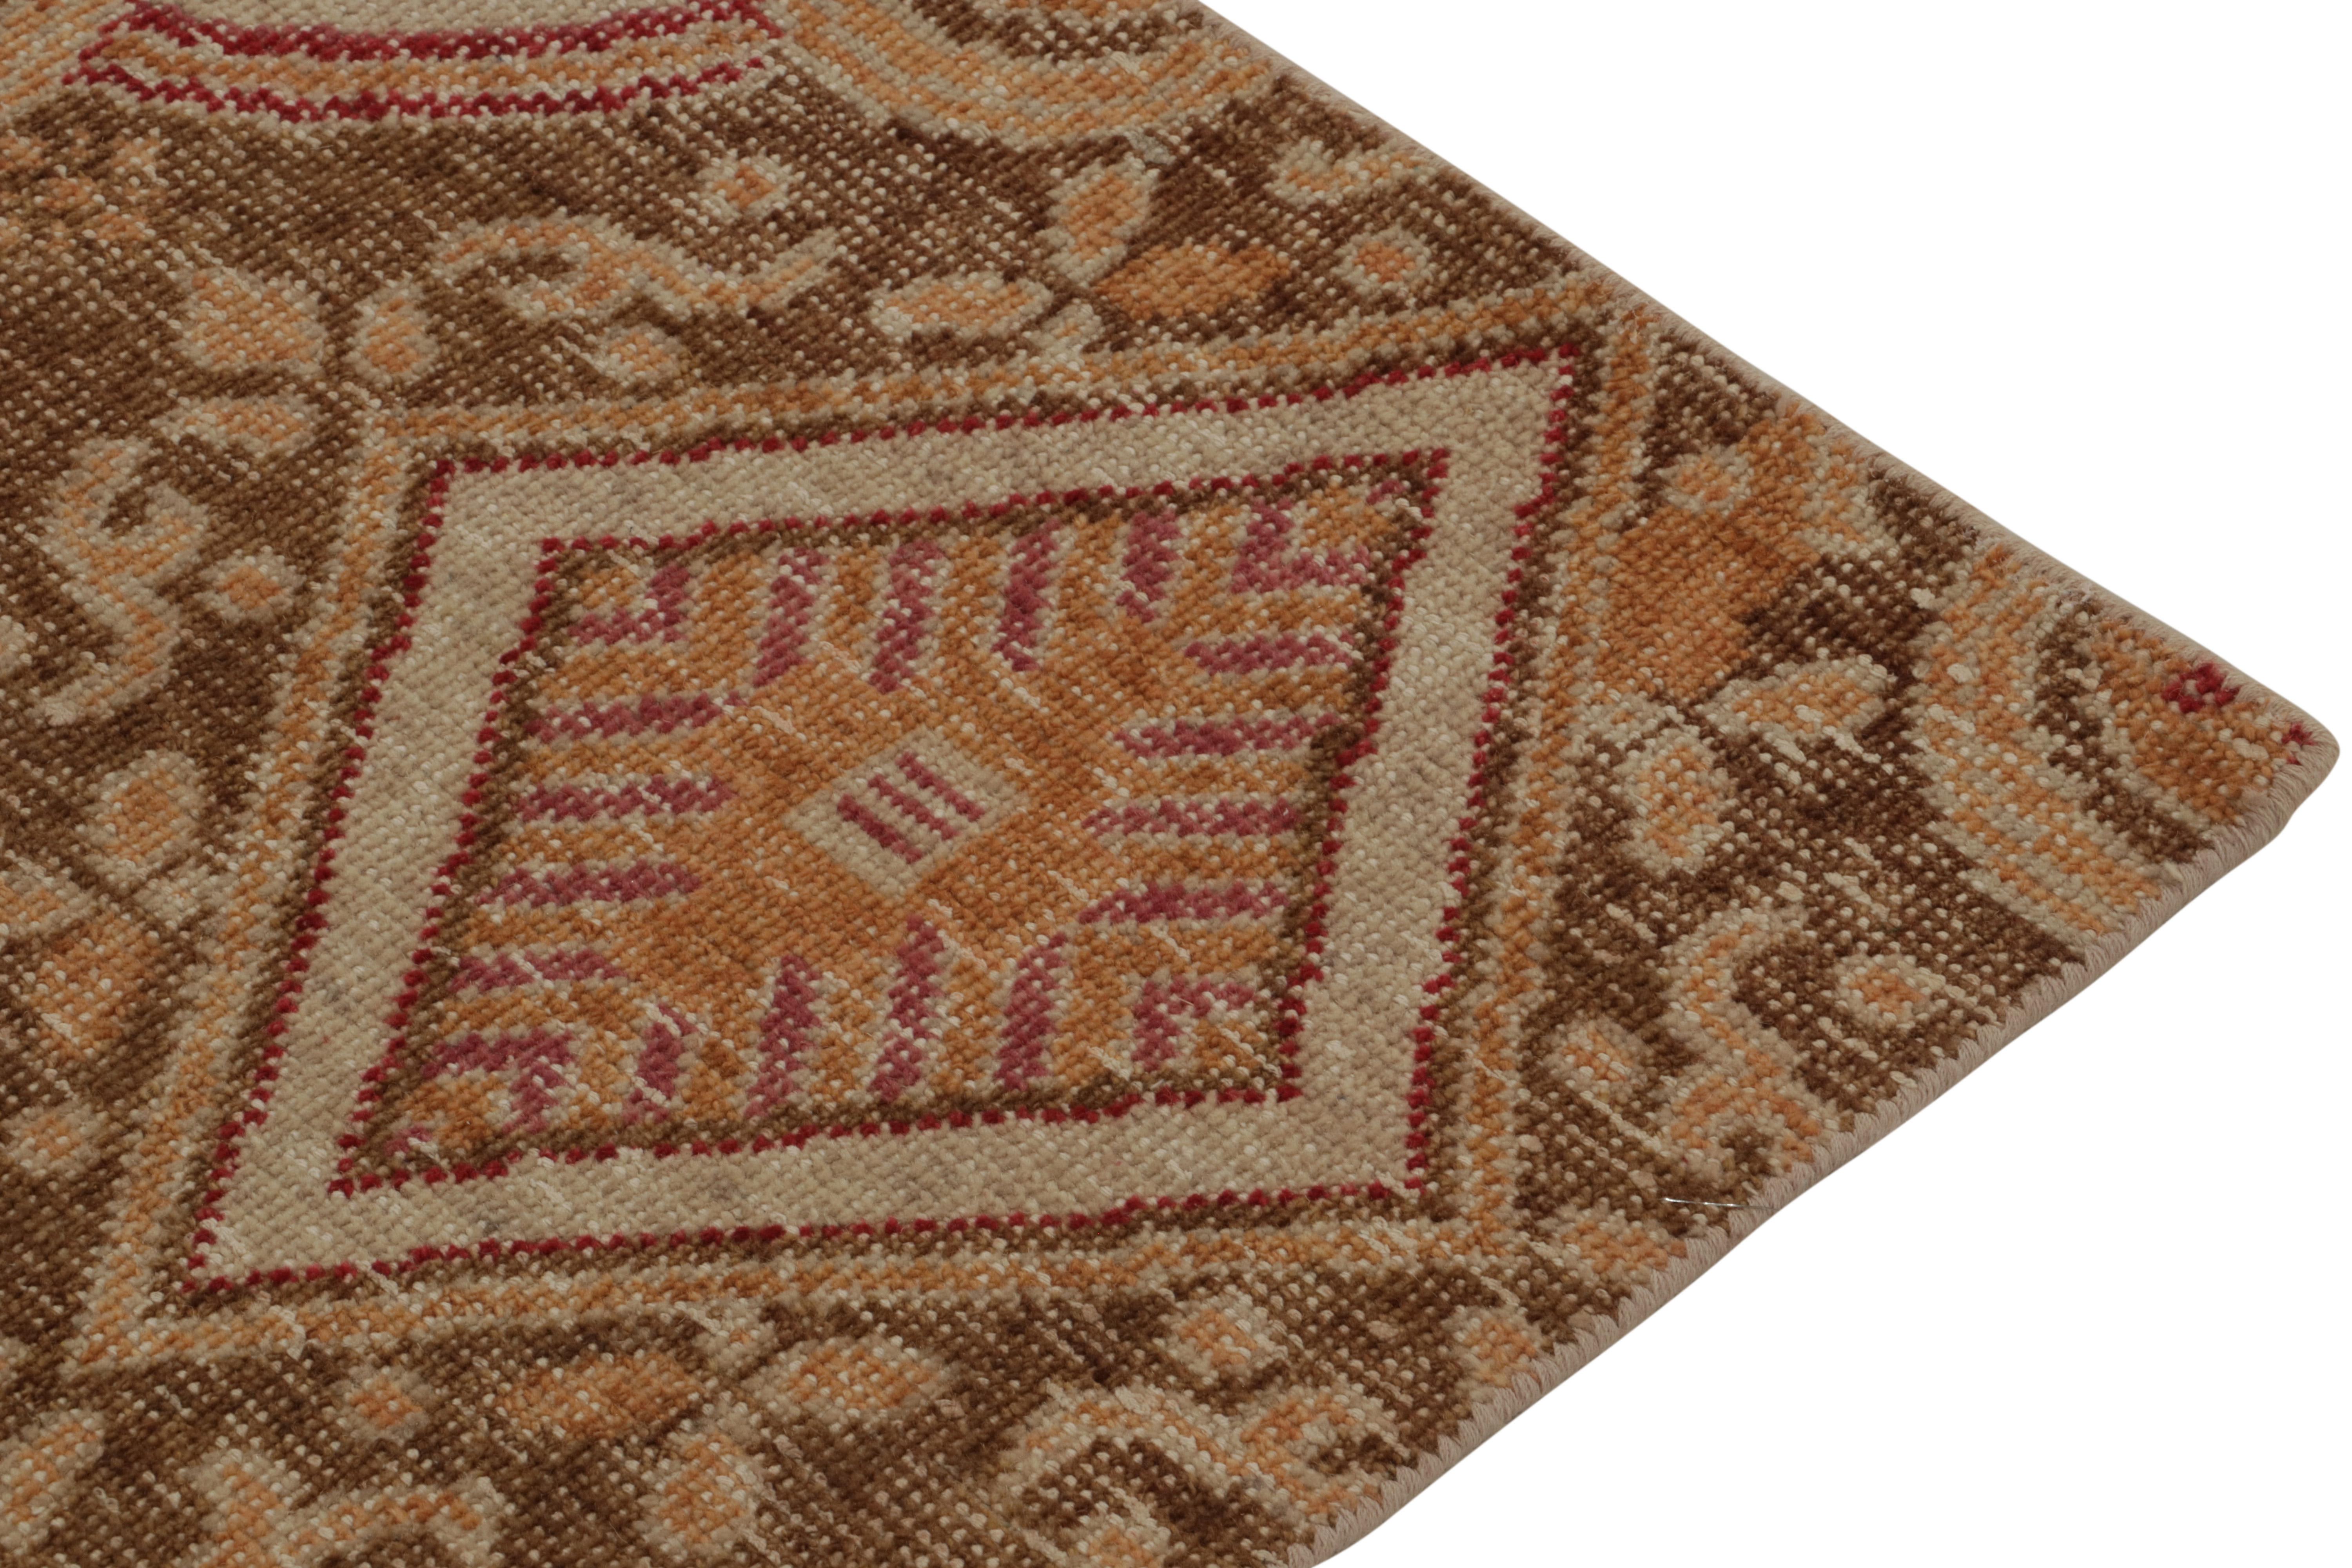 Hand-Knotted Rug & Kilim’s Distressed Style Rug in Red, Green, Gold, White Trellises For Sale